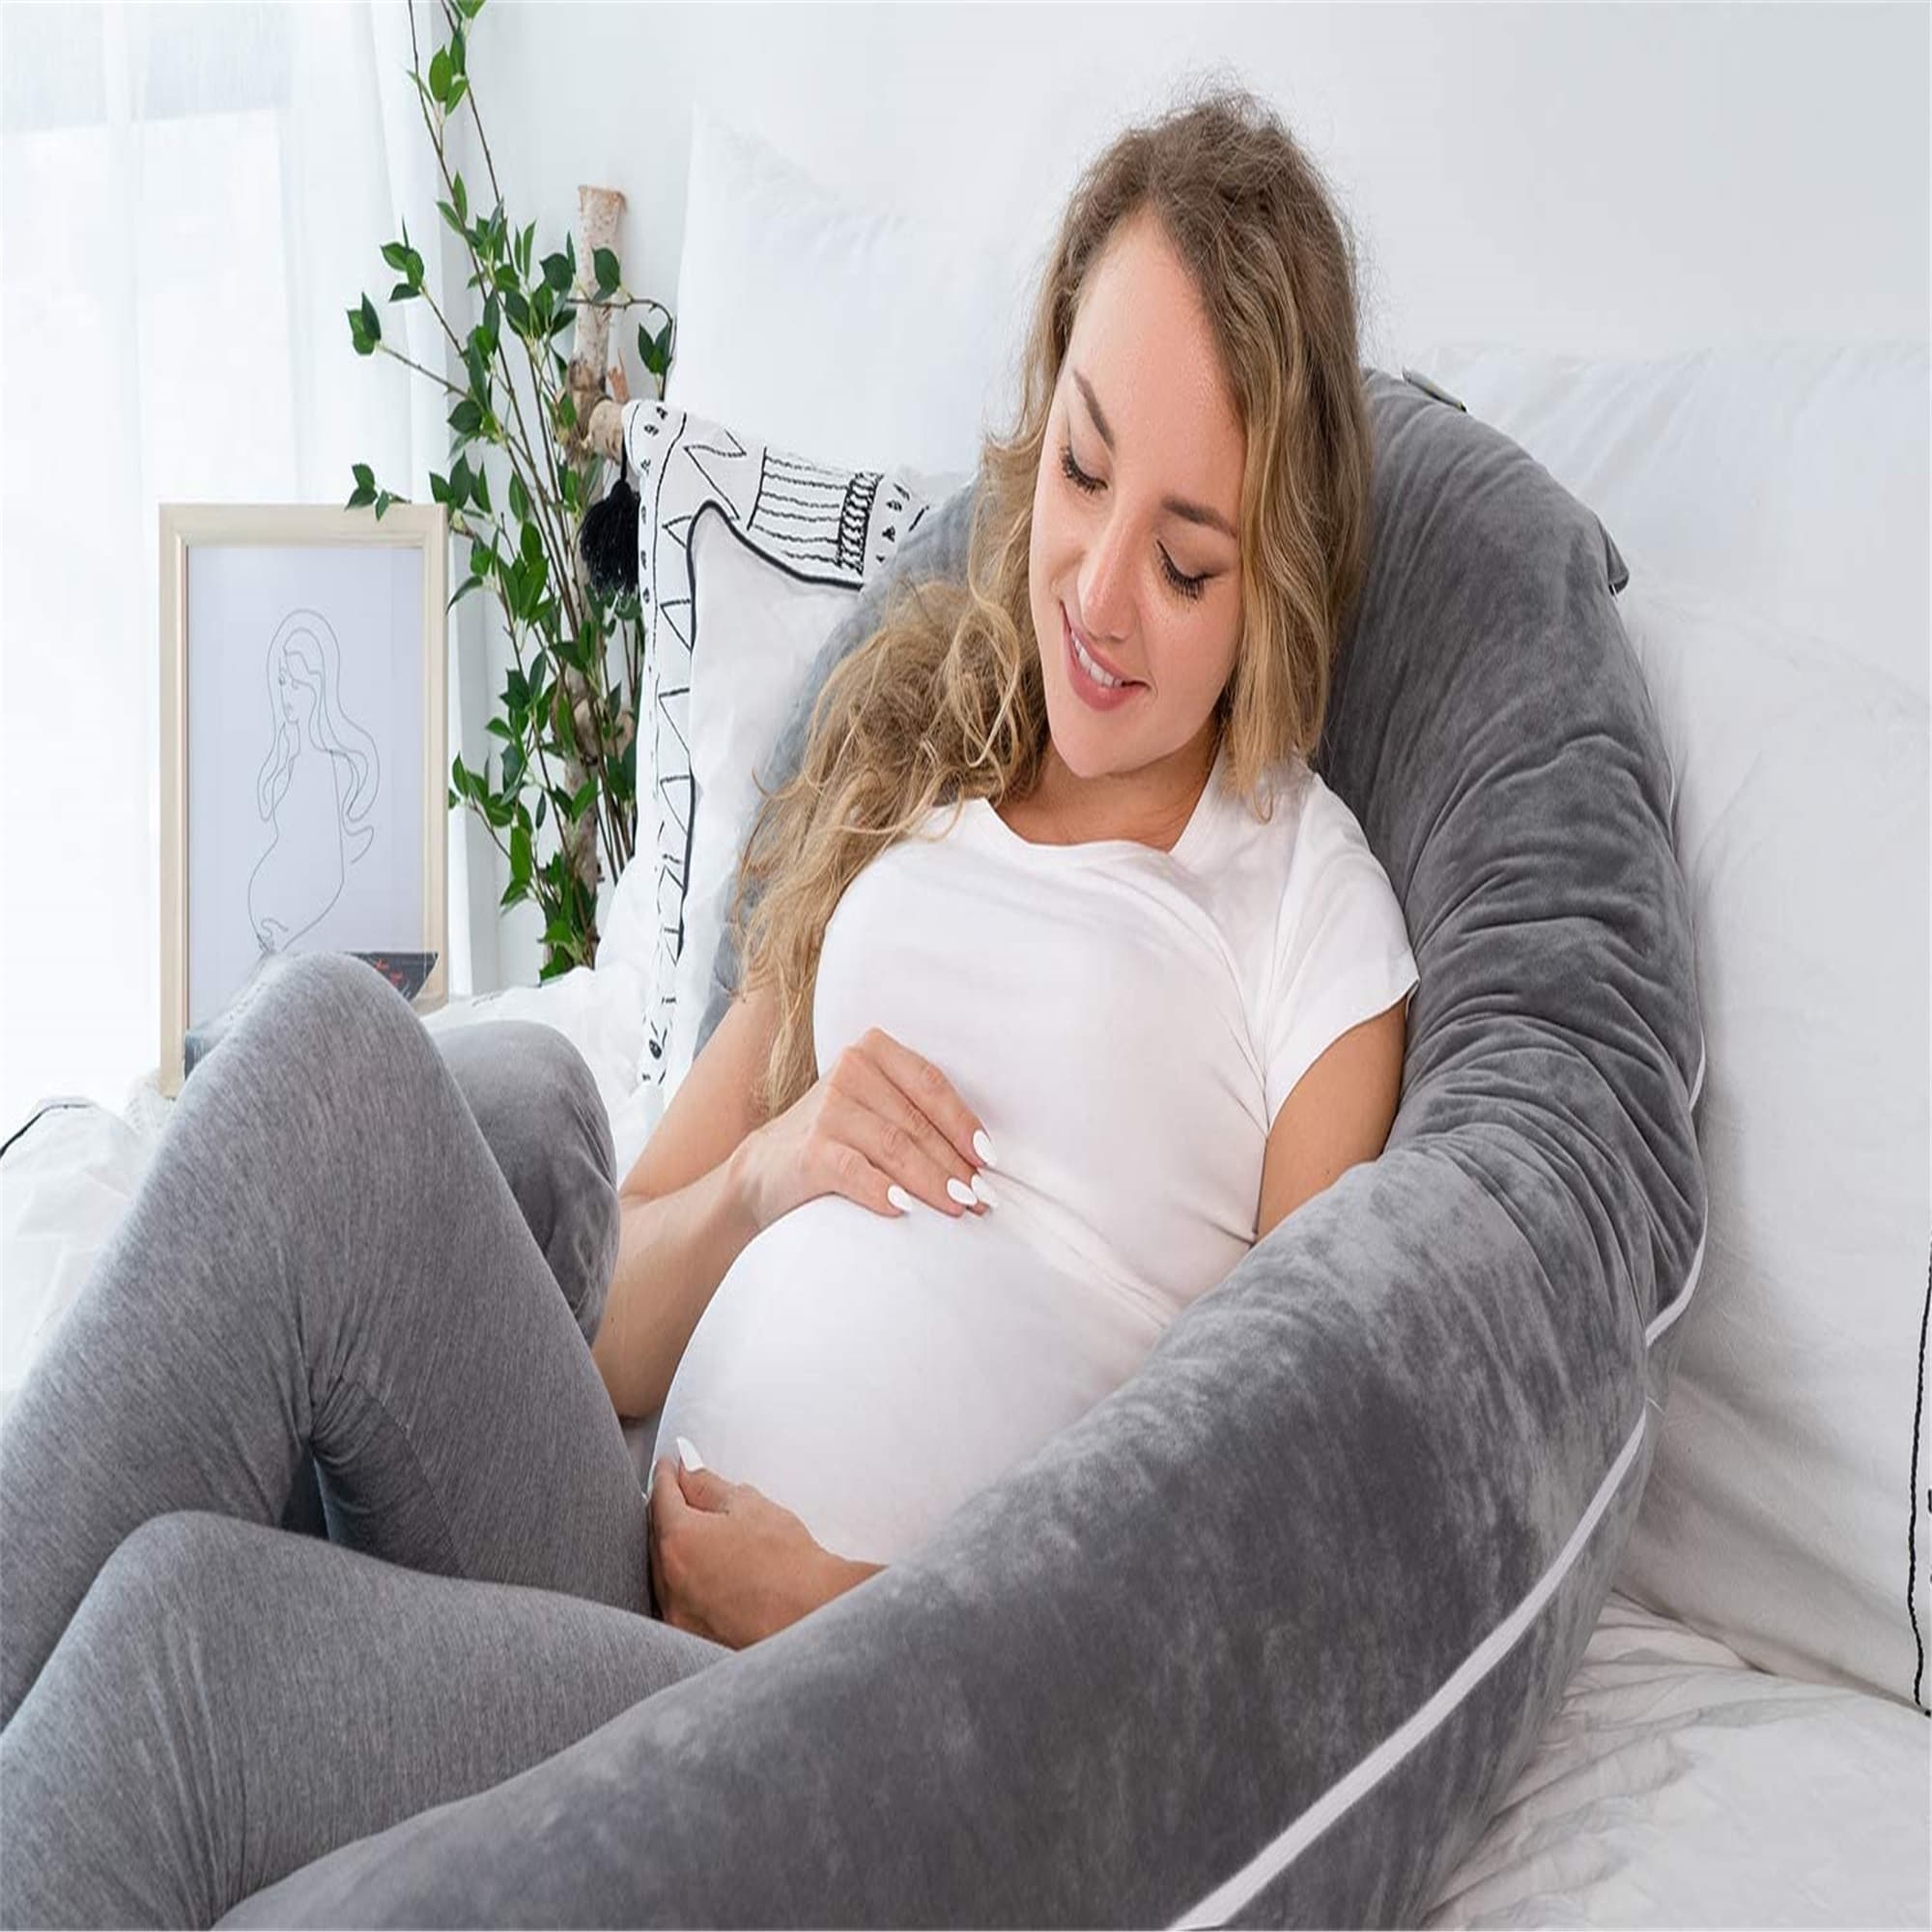 https://ak1.ostkcdn.com/images/products/is/images/direct/f168ec367b89f89b72f72b0f8dc66dfbe5d96a2a/Pregnancy-Pillow%2CMaternity-Body-Pillow-for-Pregnant-Women%2CC-Shaped-Full-Body-Pillow-with-Zippers-Jersey-Cover.jpg